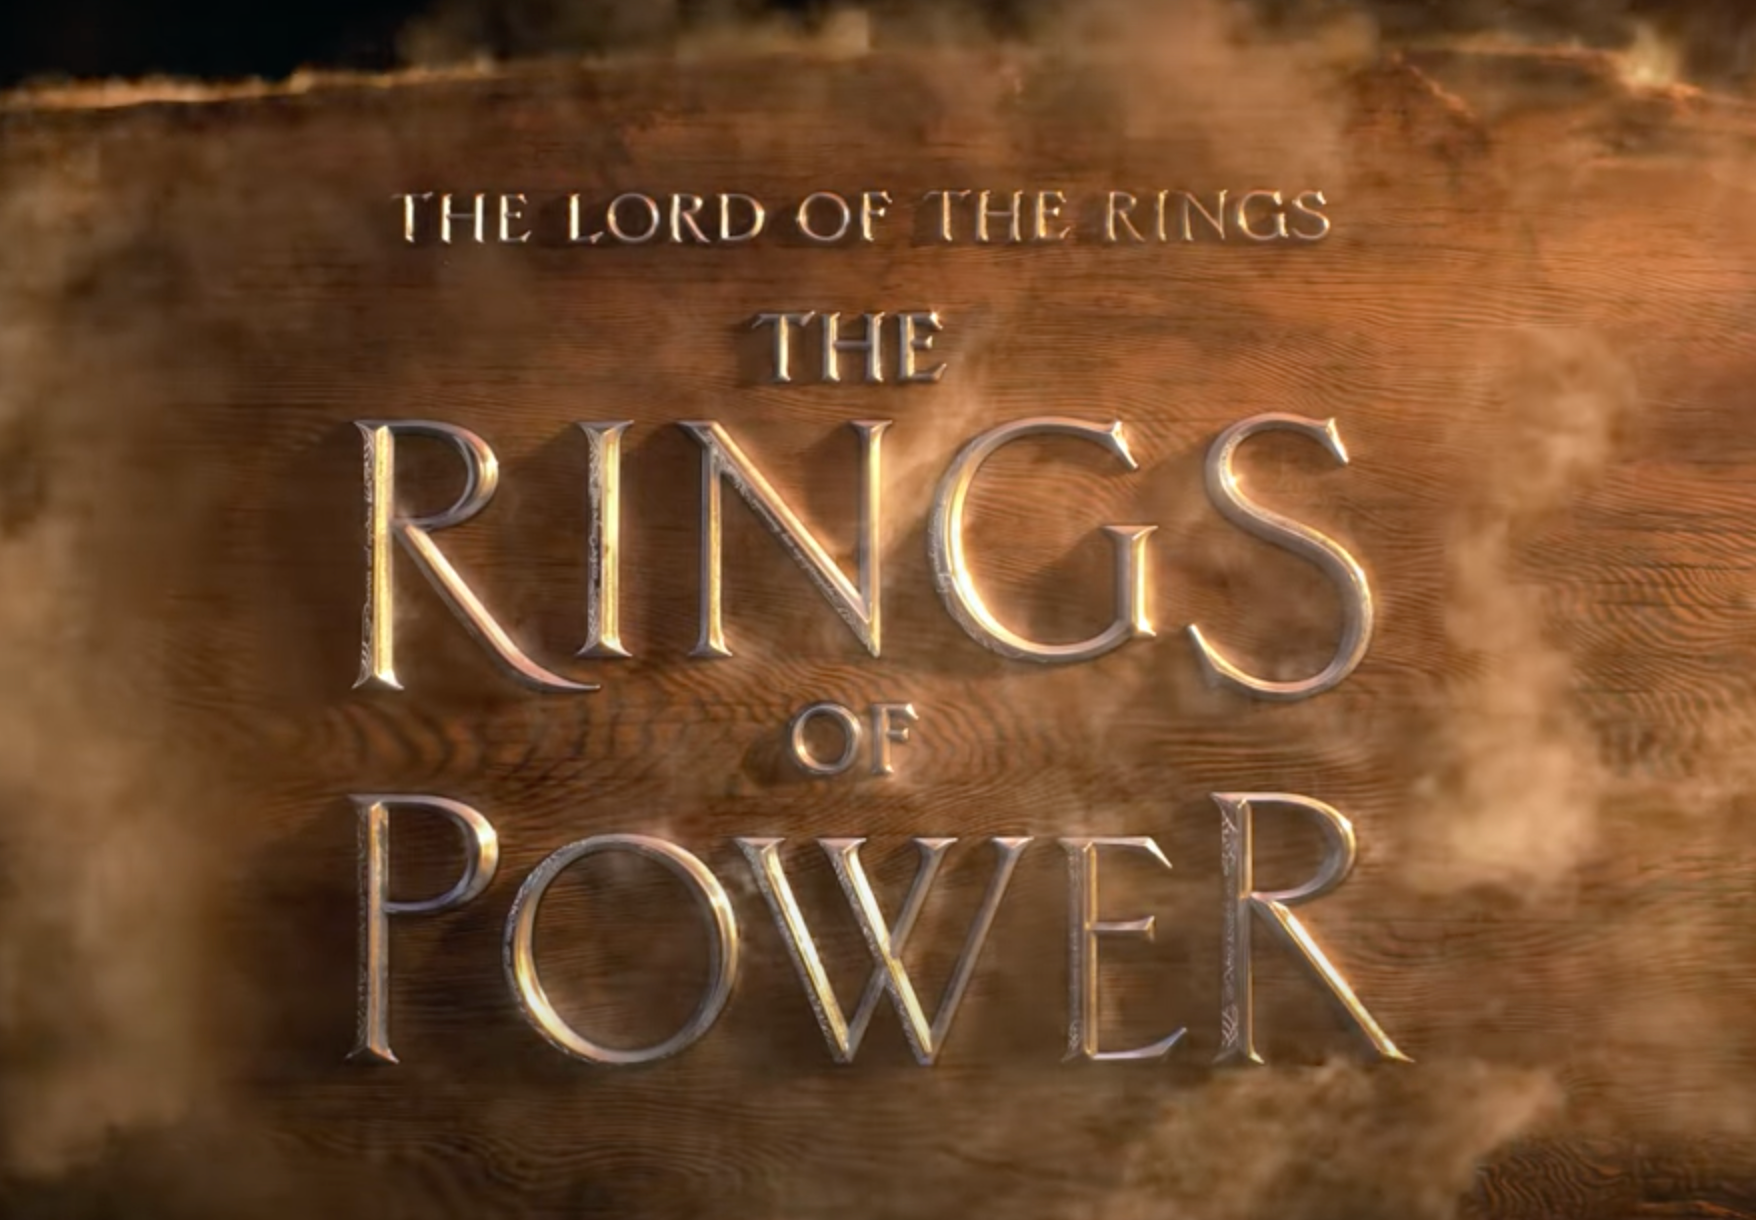 A new trailer reveals official name of Amazon’s ‘Lord of the Rings’ TV show